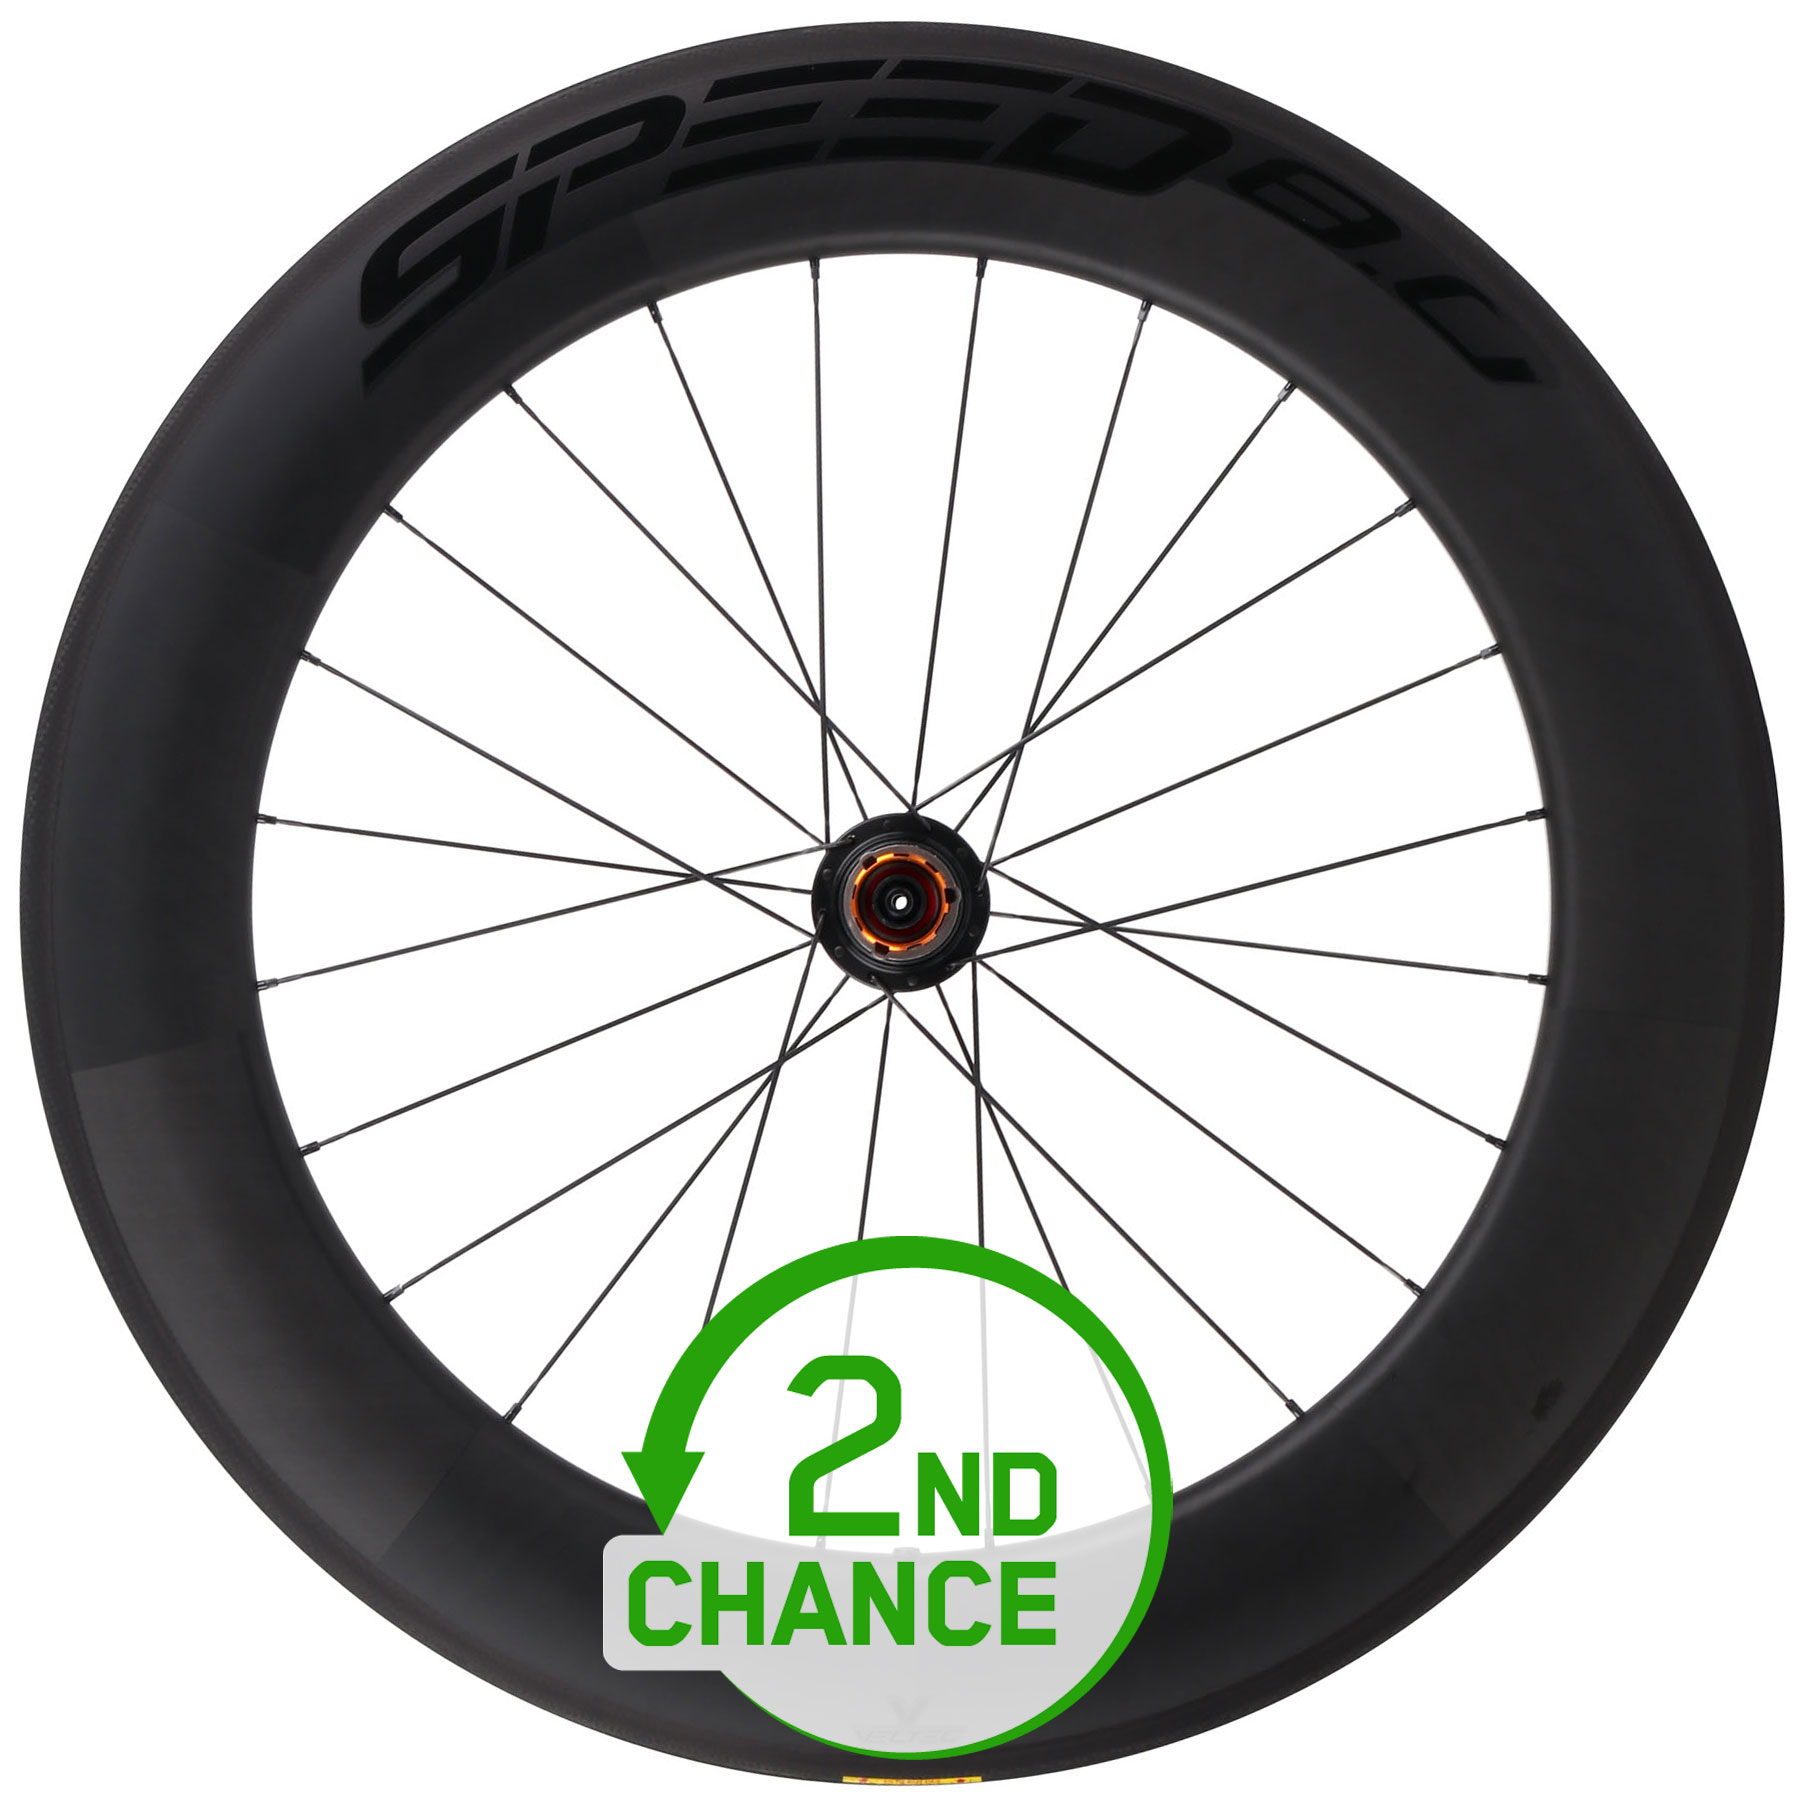 Picture of Veltec Speed 8.0 Carbon Rear Wheel | Clincher | QR130 - black with black decals - 2nd Choice